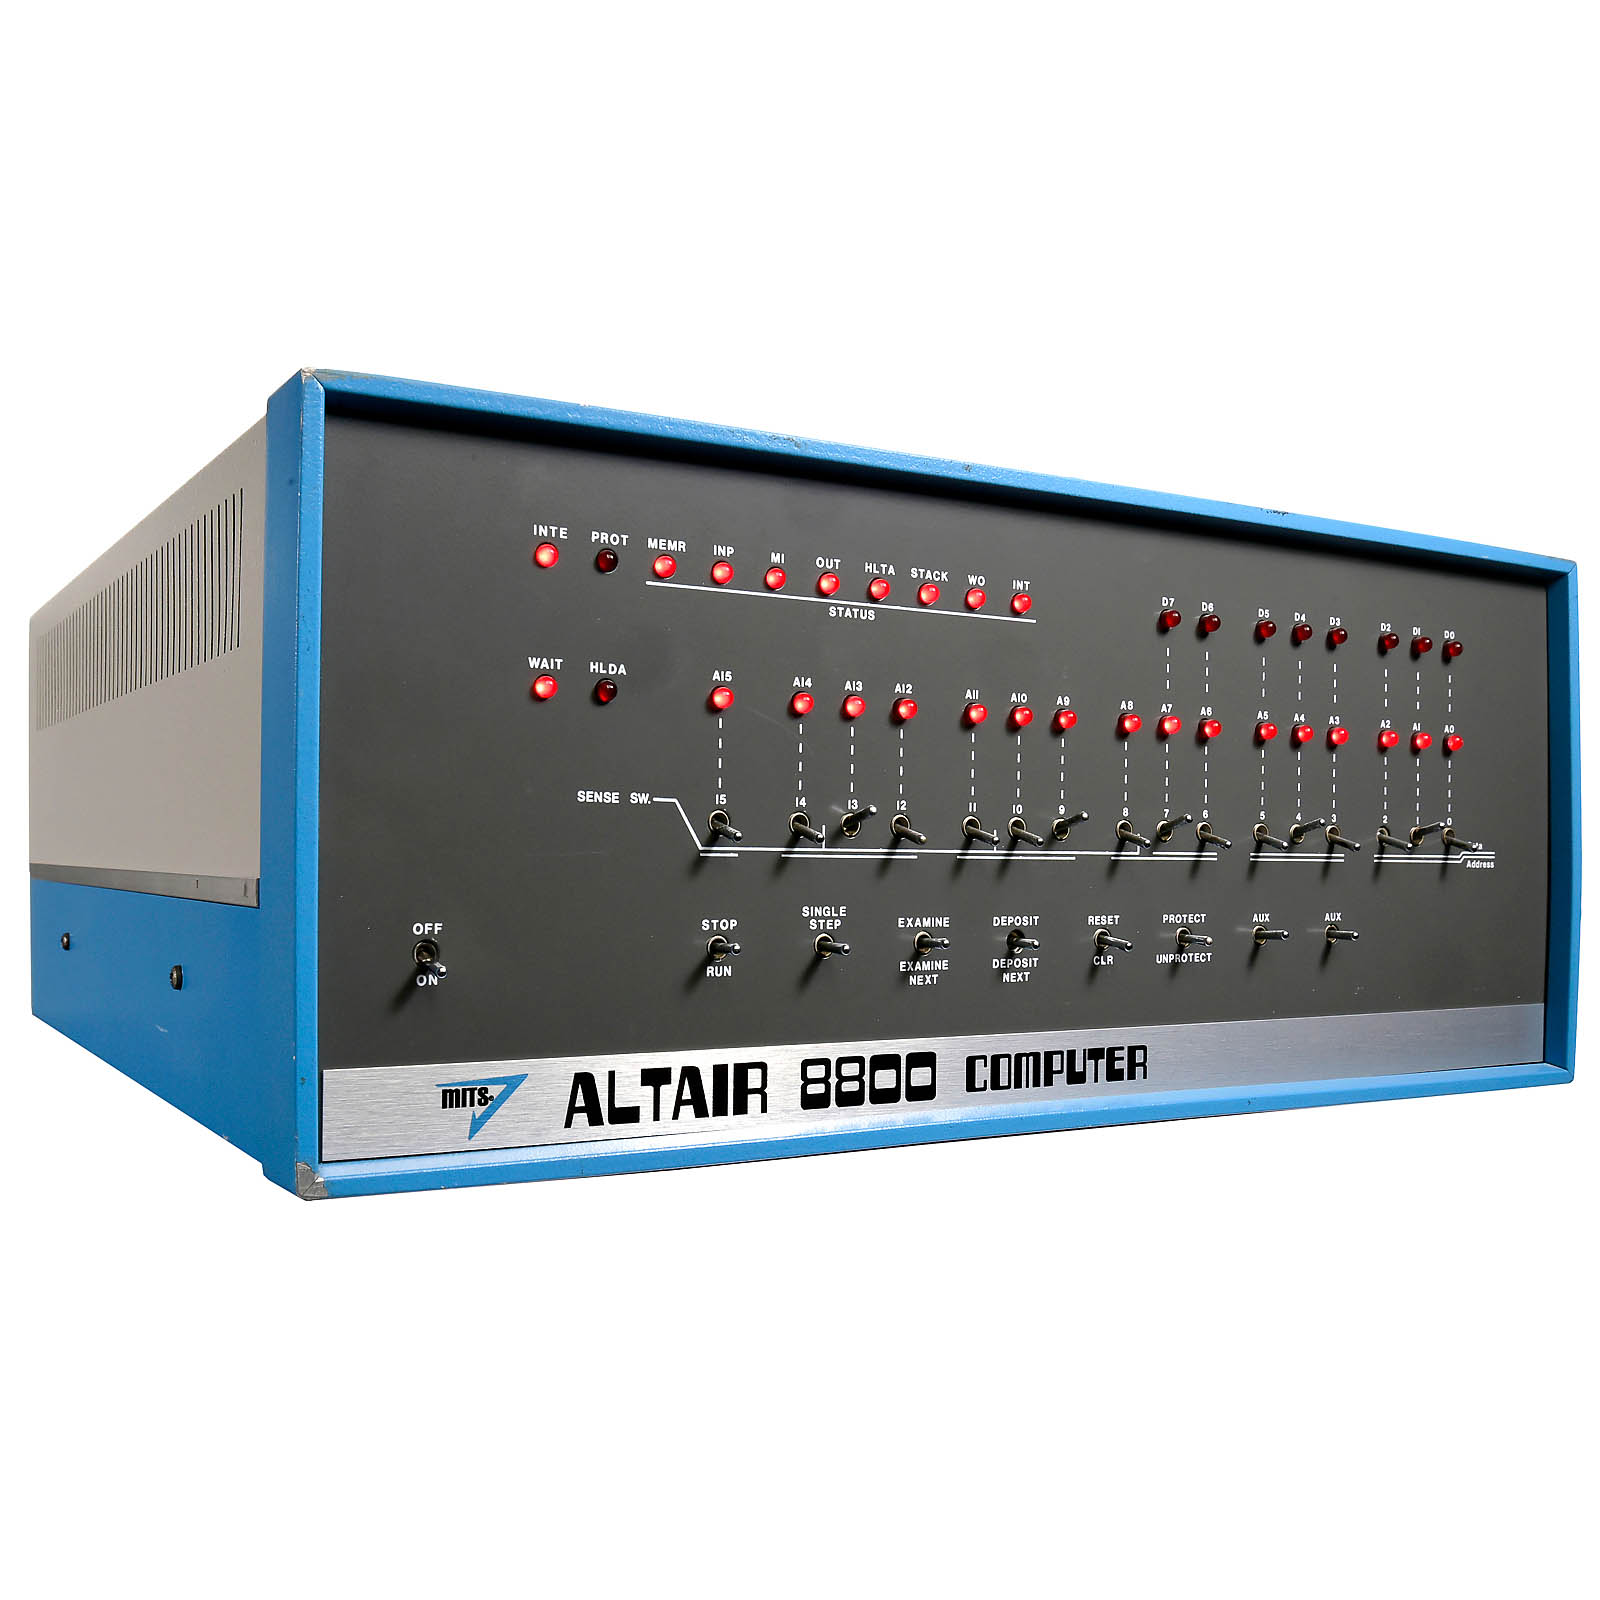 MITS Altair 8800, 1974
The Altair was the first personal computer in the world to be offered in